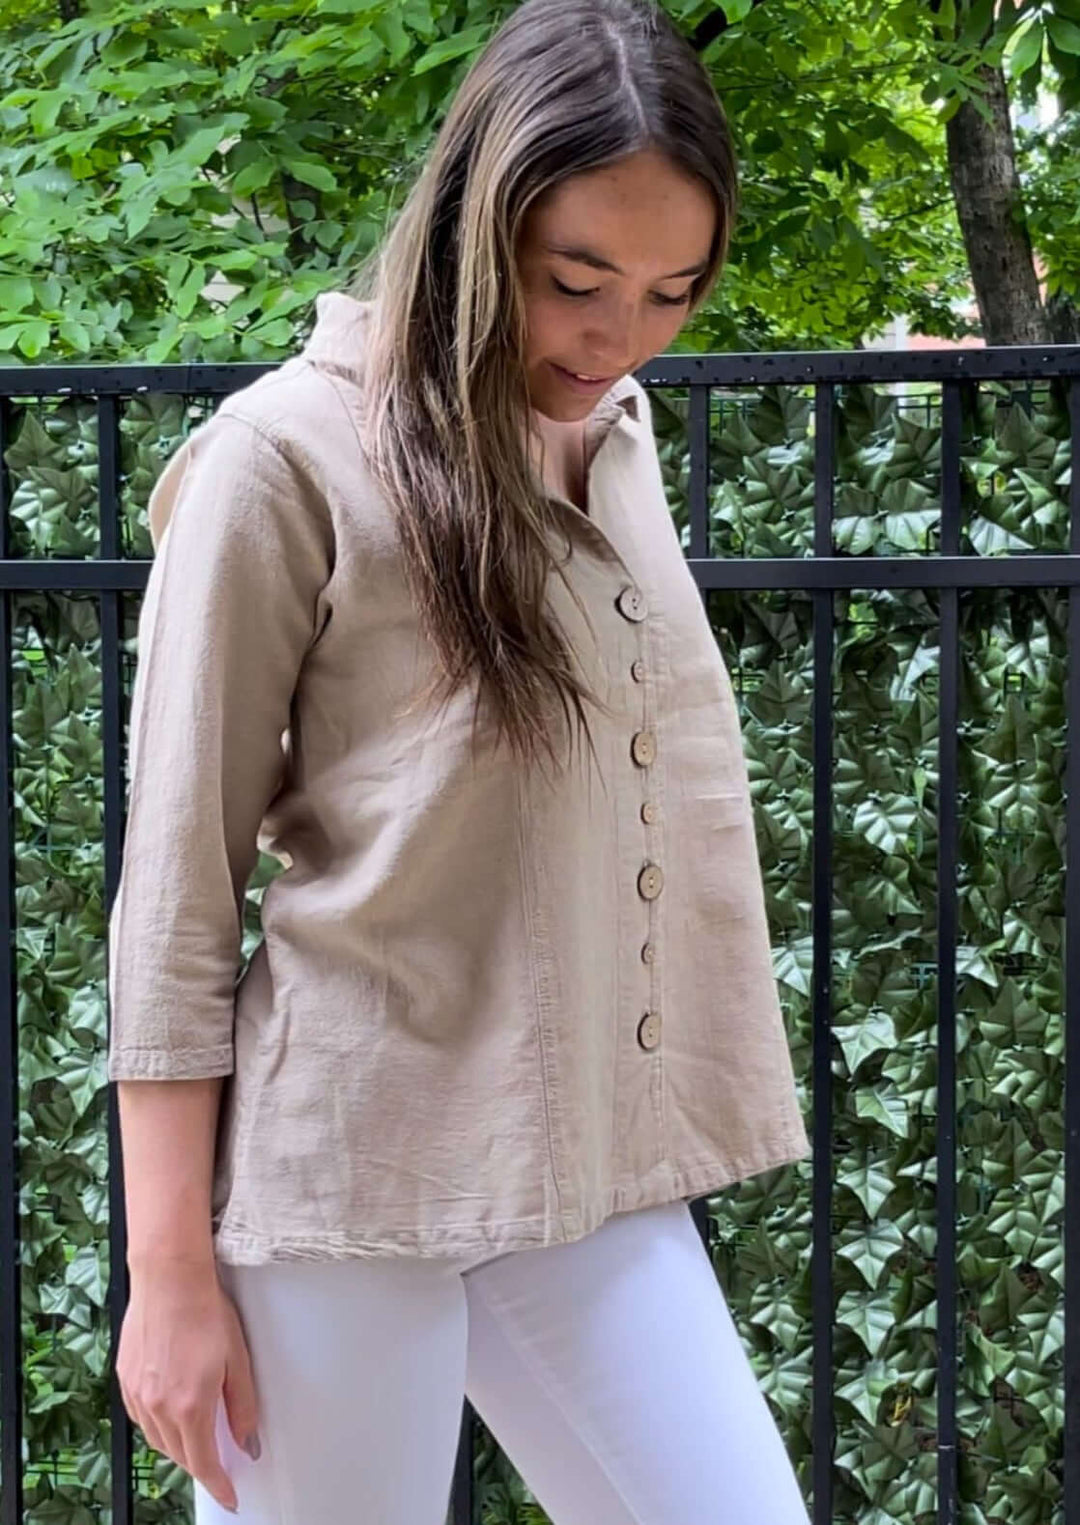 Made in USA Classy Women's 100% USA Cotton Button Down Ladies Top with Alternating Button Sizes in Coffee Tan | Classy Cozy Cool Women's Made in America Boutique